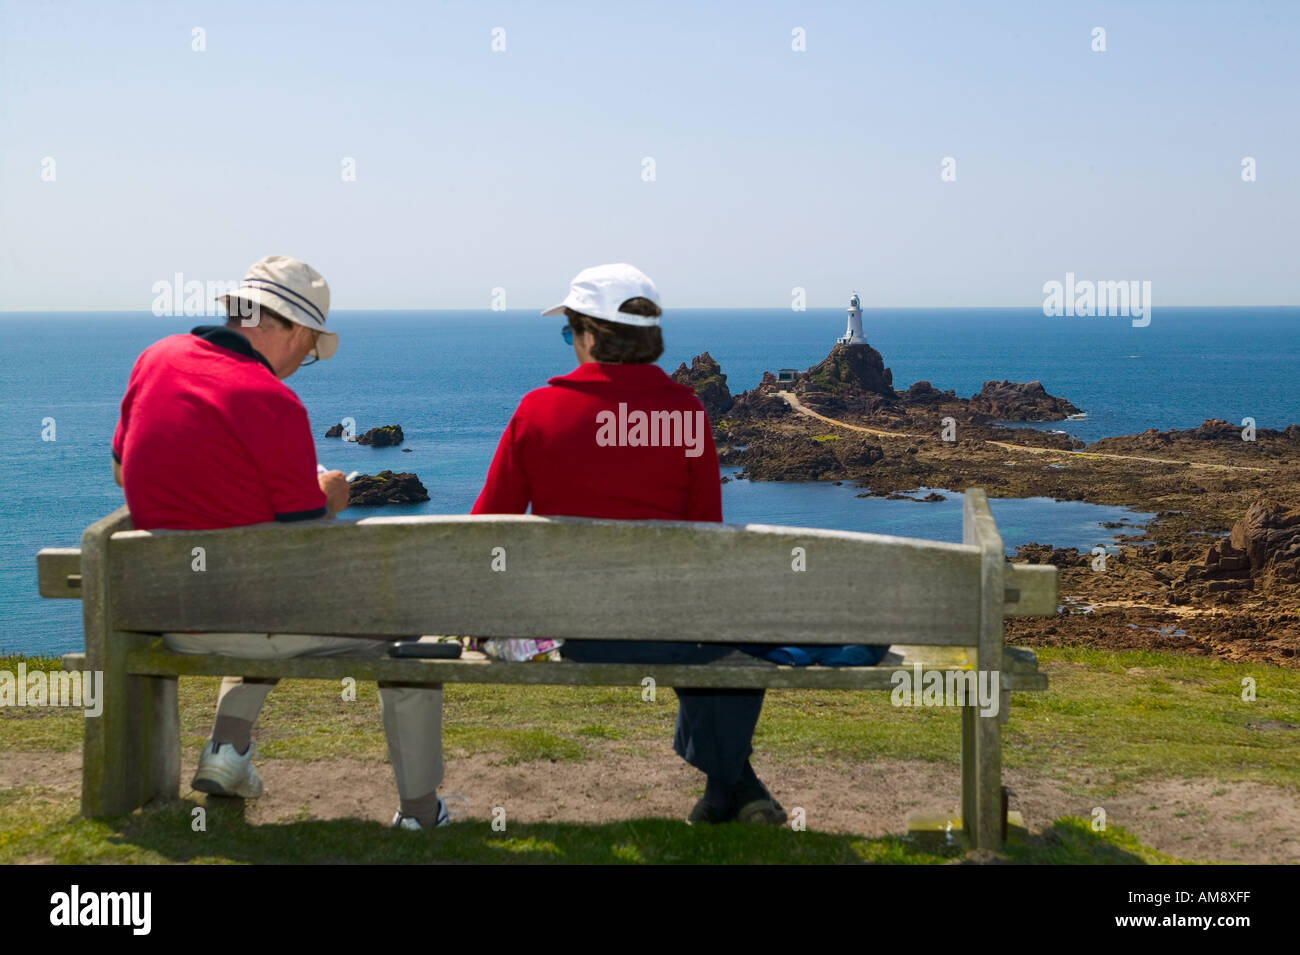 Tourists wearing red t-shorts and wearing hats at Corbiere Lighthouse on the island of Jersey Stock Photo